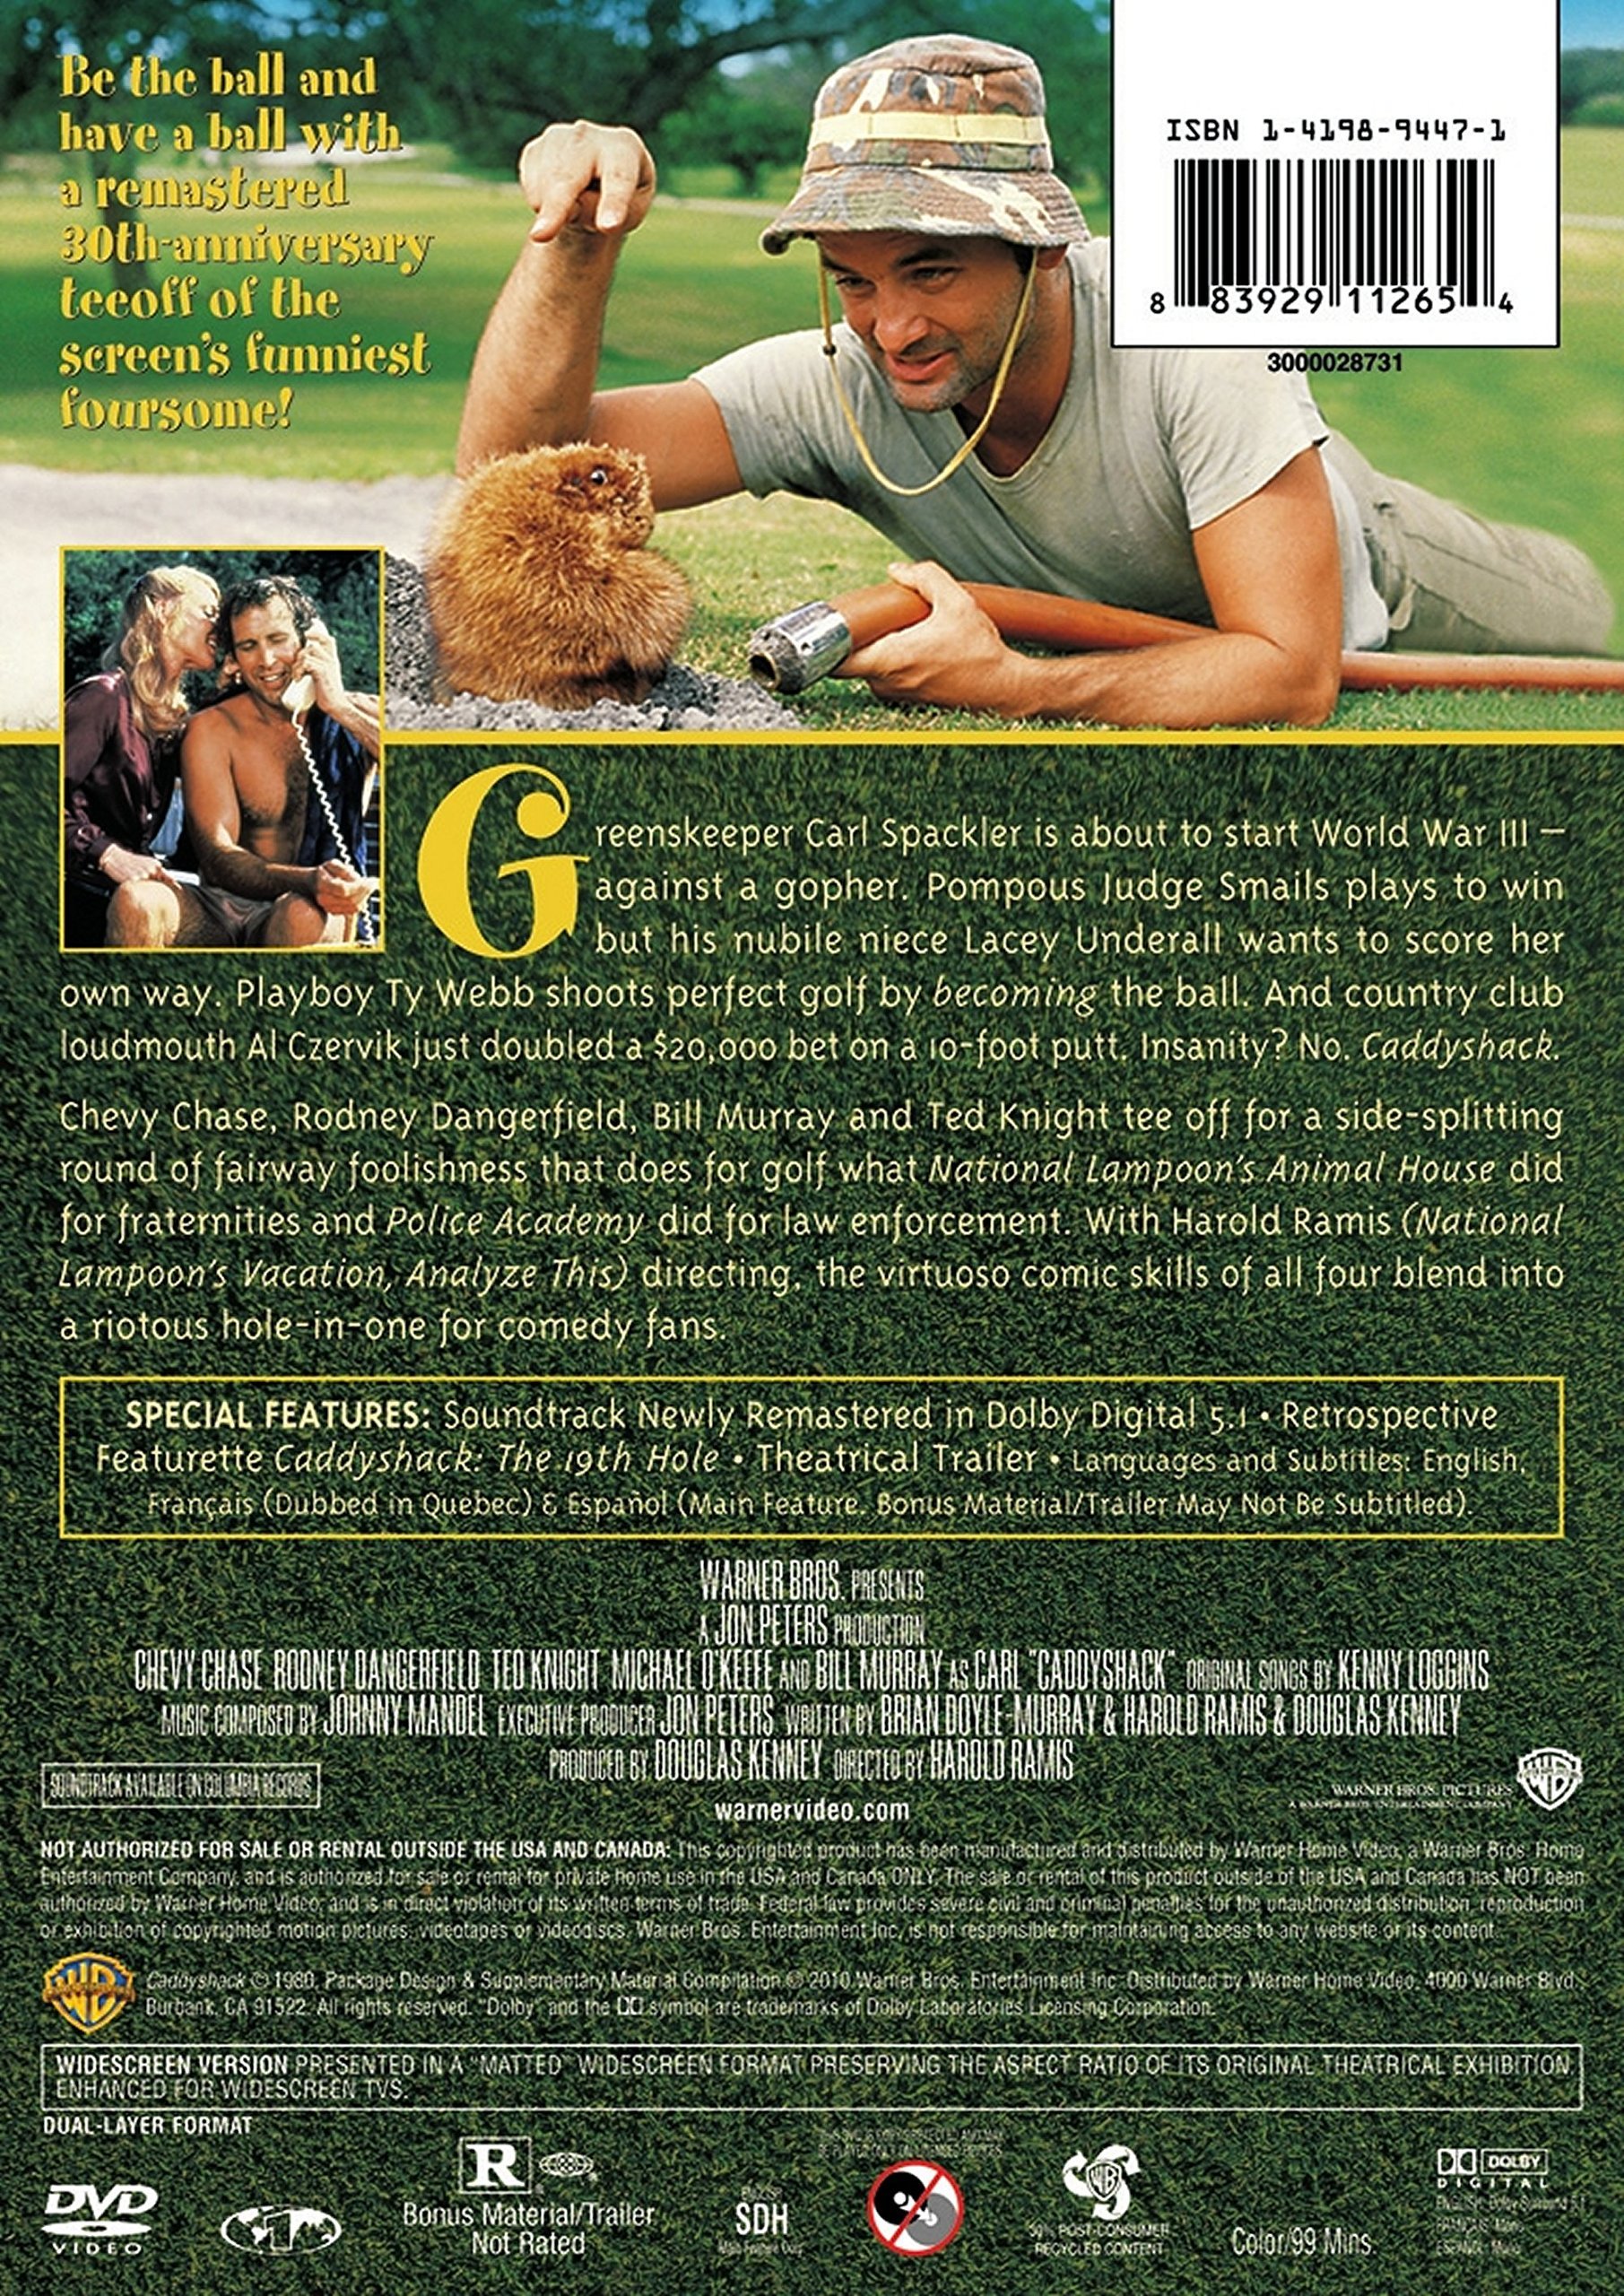 Caddyshack (30th Anniversary) (DVD), Warner Home Video, Comedy - image 2 of 7